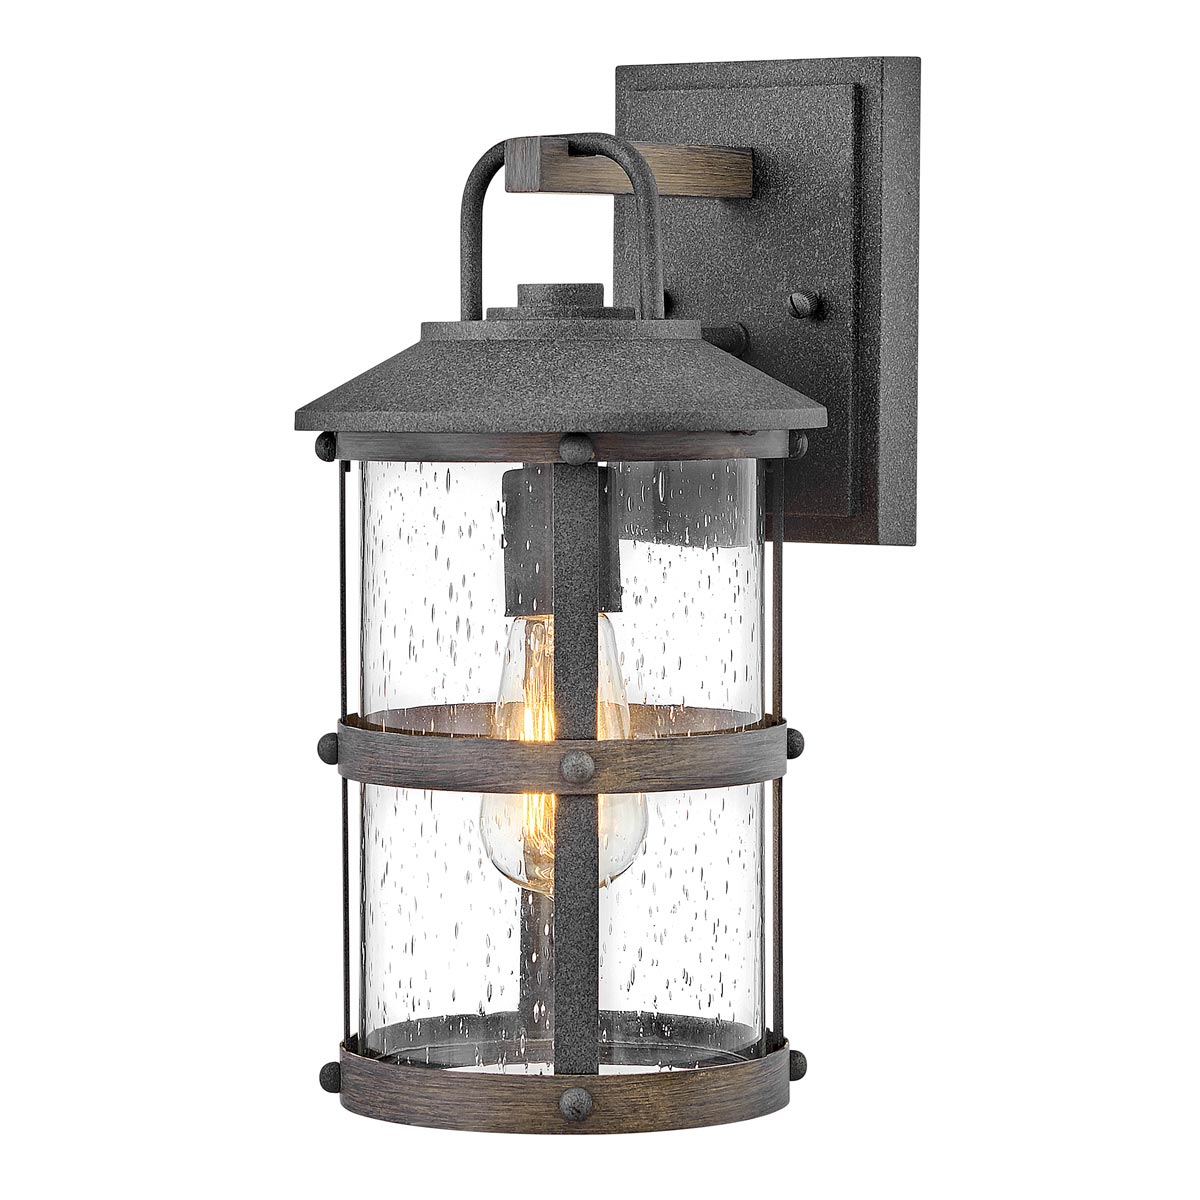 Lakehouse 1 Light Small Outdoor Wall Lantern Zinc Seeded Glass